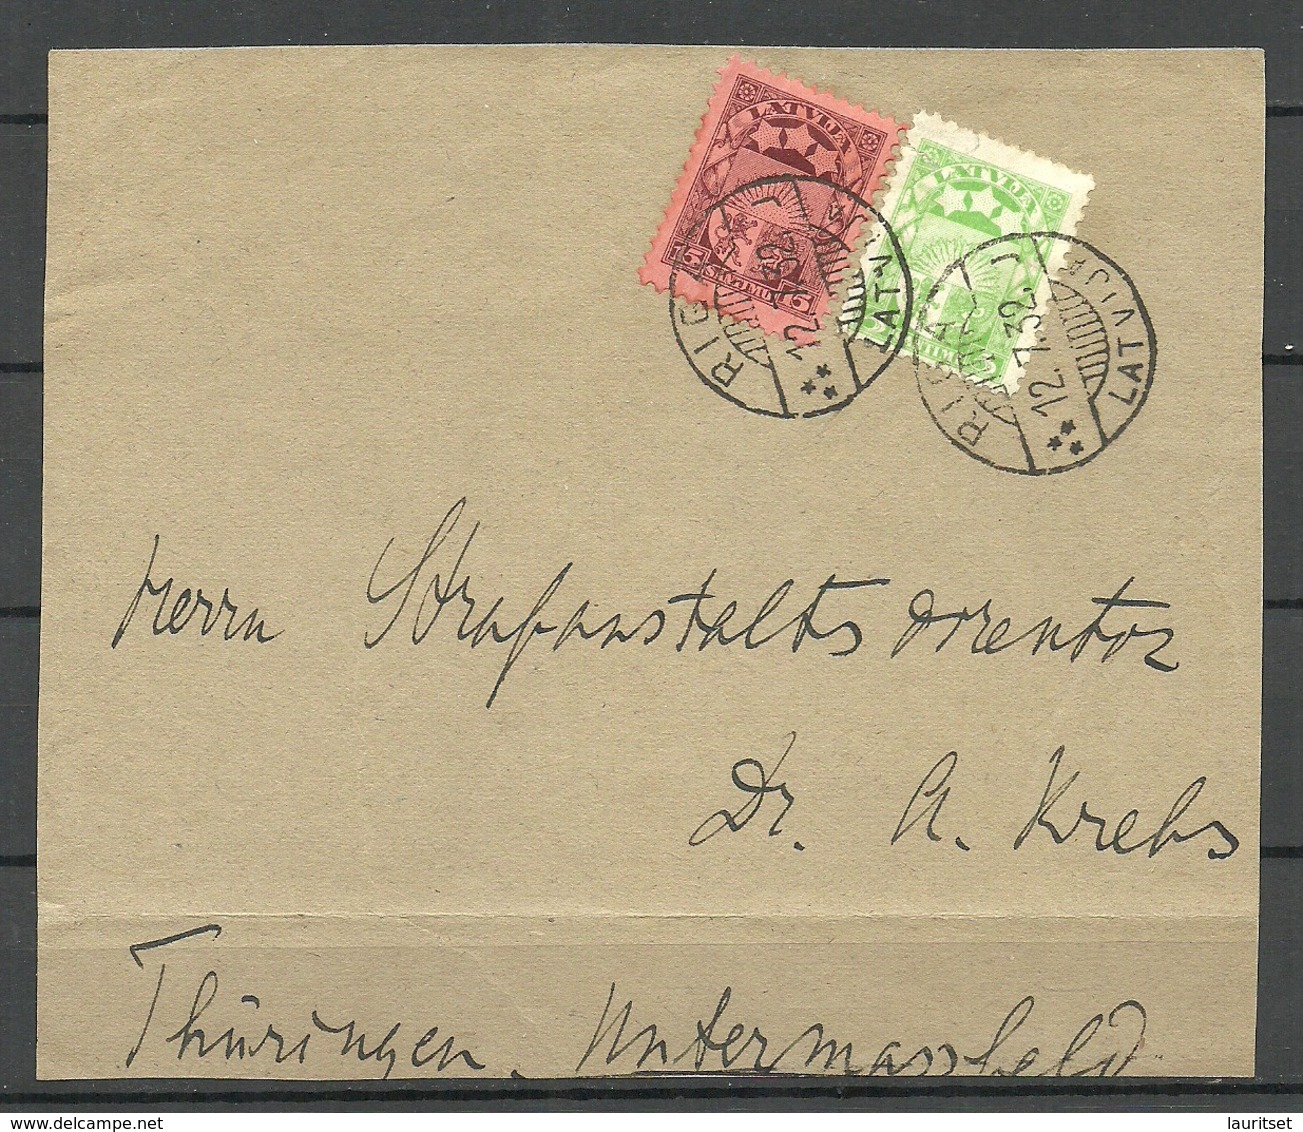 LETTLAND Latvia 1932 O Riga Briefstück/Briefvorderseite Cover Front With 2 Stamps - Lettland